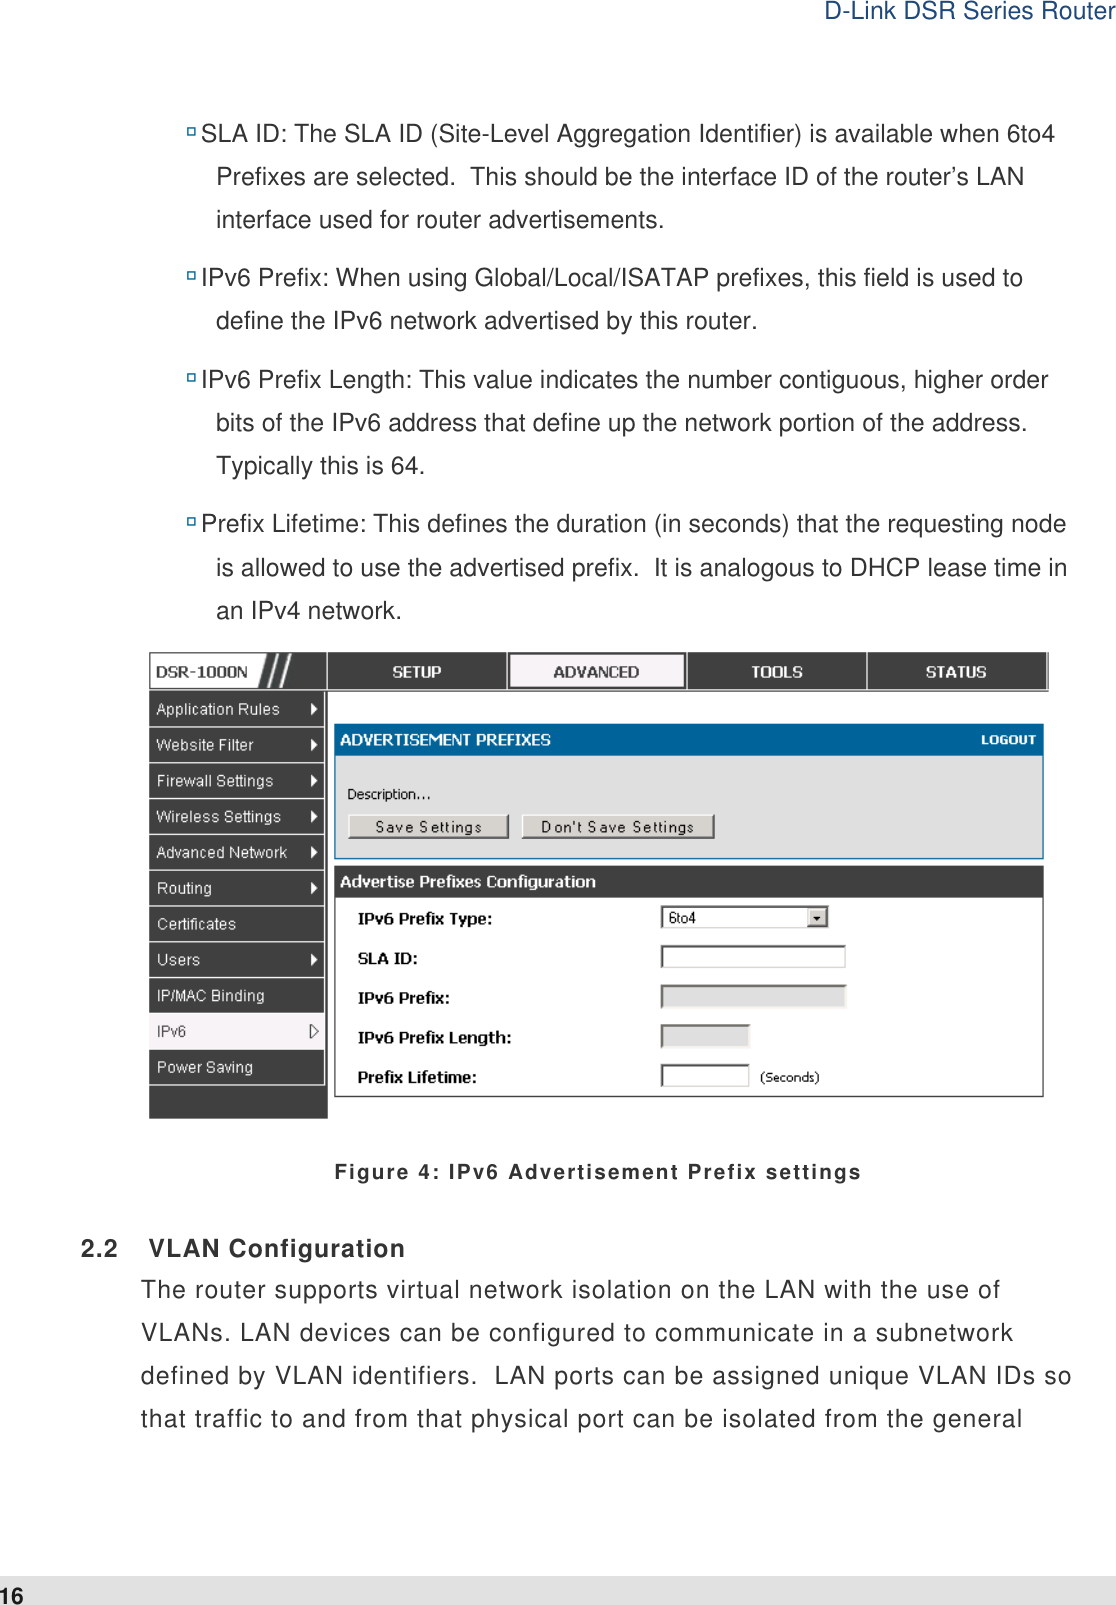 D-Link DSR Series Router 16  SLA ID: The SLA ID (Site-Level Aggregation Identifier) is available when 6to4 Prefixes are selected.  This should be the interface ID of the router’s LAN interface used for router advertisements.   IPv6 Prefix: When using Global/Local/ISATAP prefixes, this field is used to define the IPv6 network advertised by this router.  IPv6 Prefix Length: This value indicates the number contiguous, higher order bits of the IPv6 address that define up the network portion of the address.  Typically this is 64.   Prefix Lifetime: This defines the duration (in seconds) that the requesting node is allowed to use the advertised prefix.  It is analogous to DHCP lease time in an IPv4 network.   Figure 4: IPv6 Advertisement Prefix settings 2.2  VLAN Configuration The router supports virtual network isolation on the LAN with the use of VLANs. LAN devices can be configured to communicate in a subnetwork defined by VLAN identifiers.  LAN ports can be assigned unique VLAN IDs so that traffic to and from that physical port can be isolated from the general 